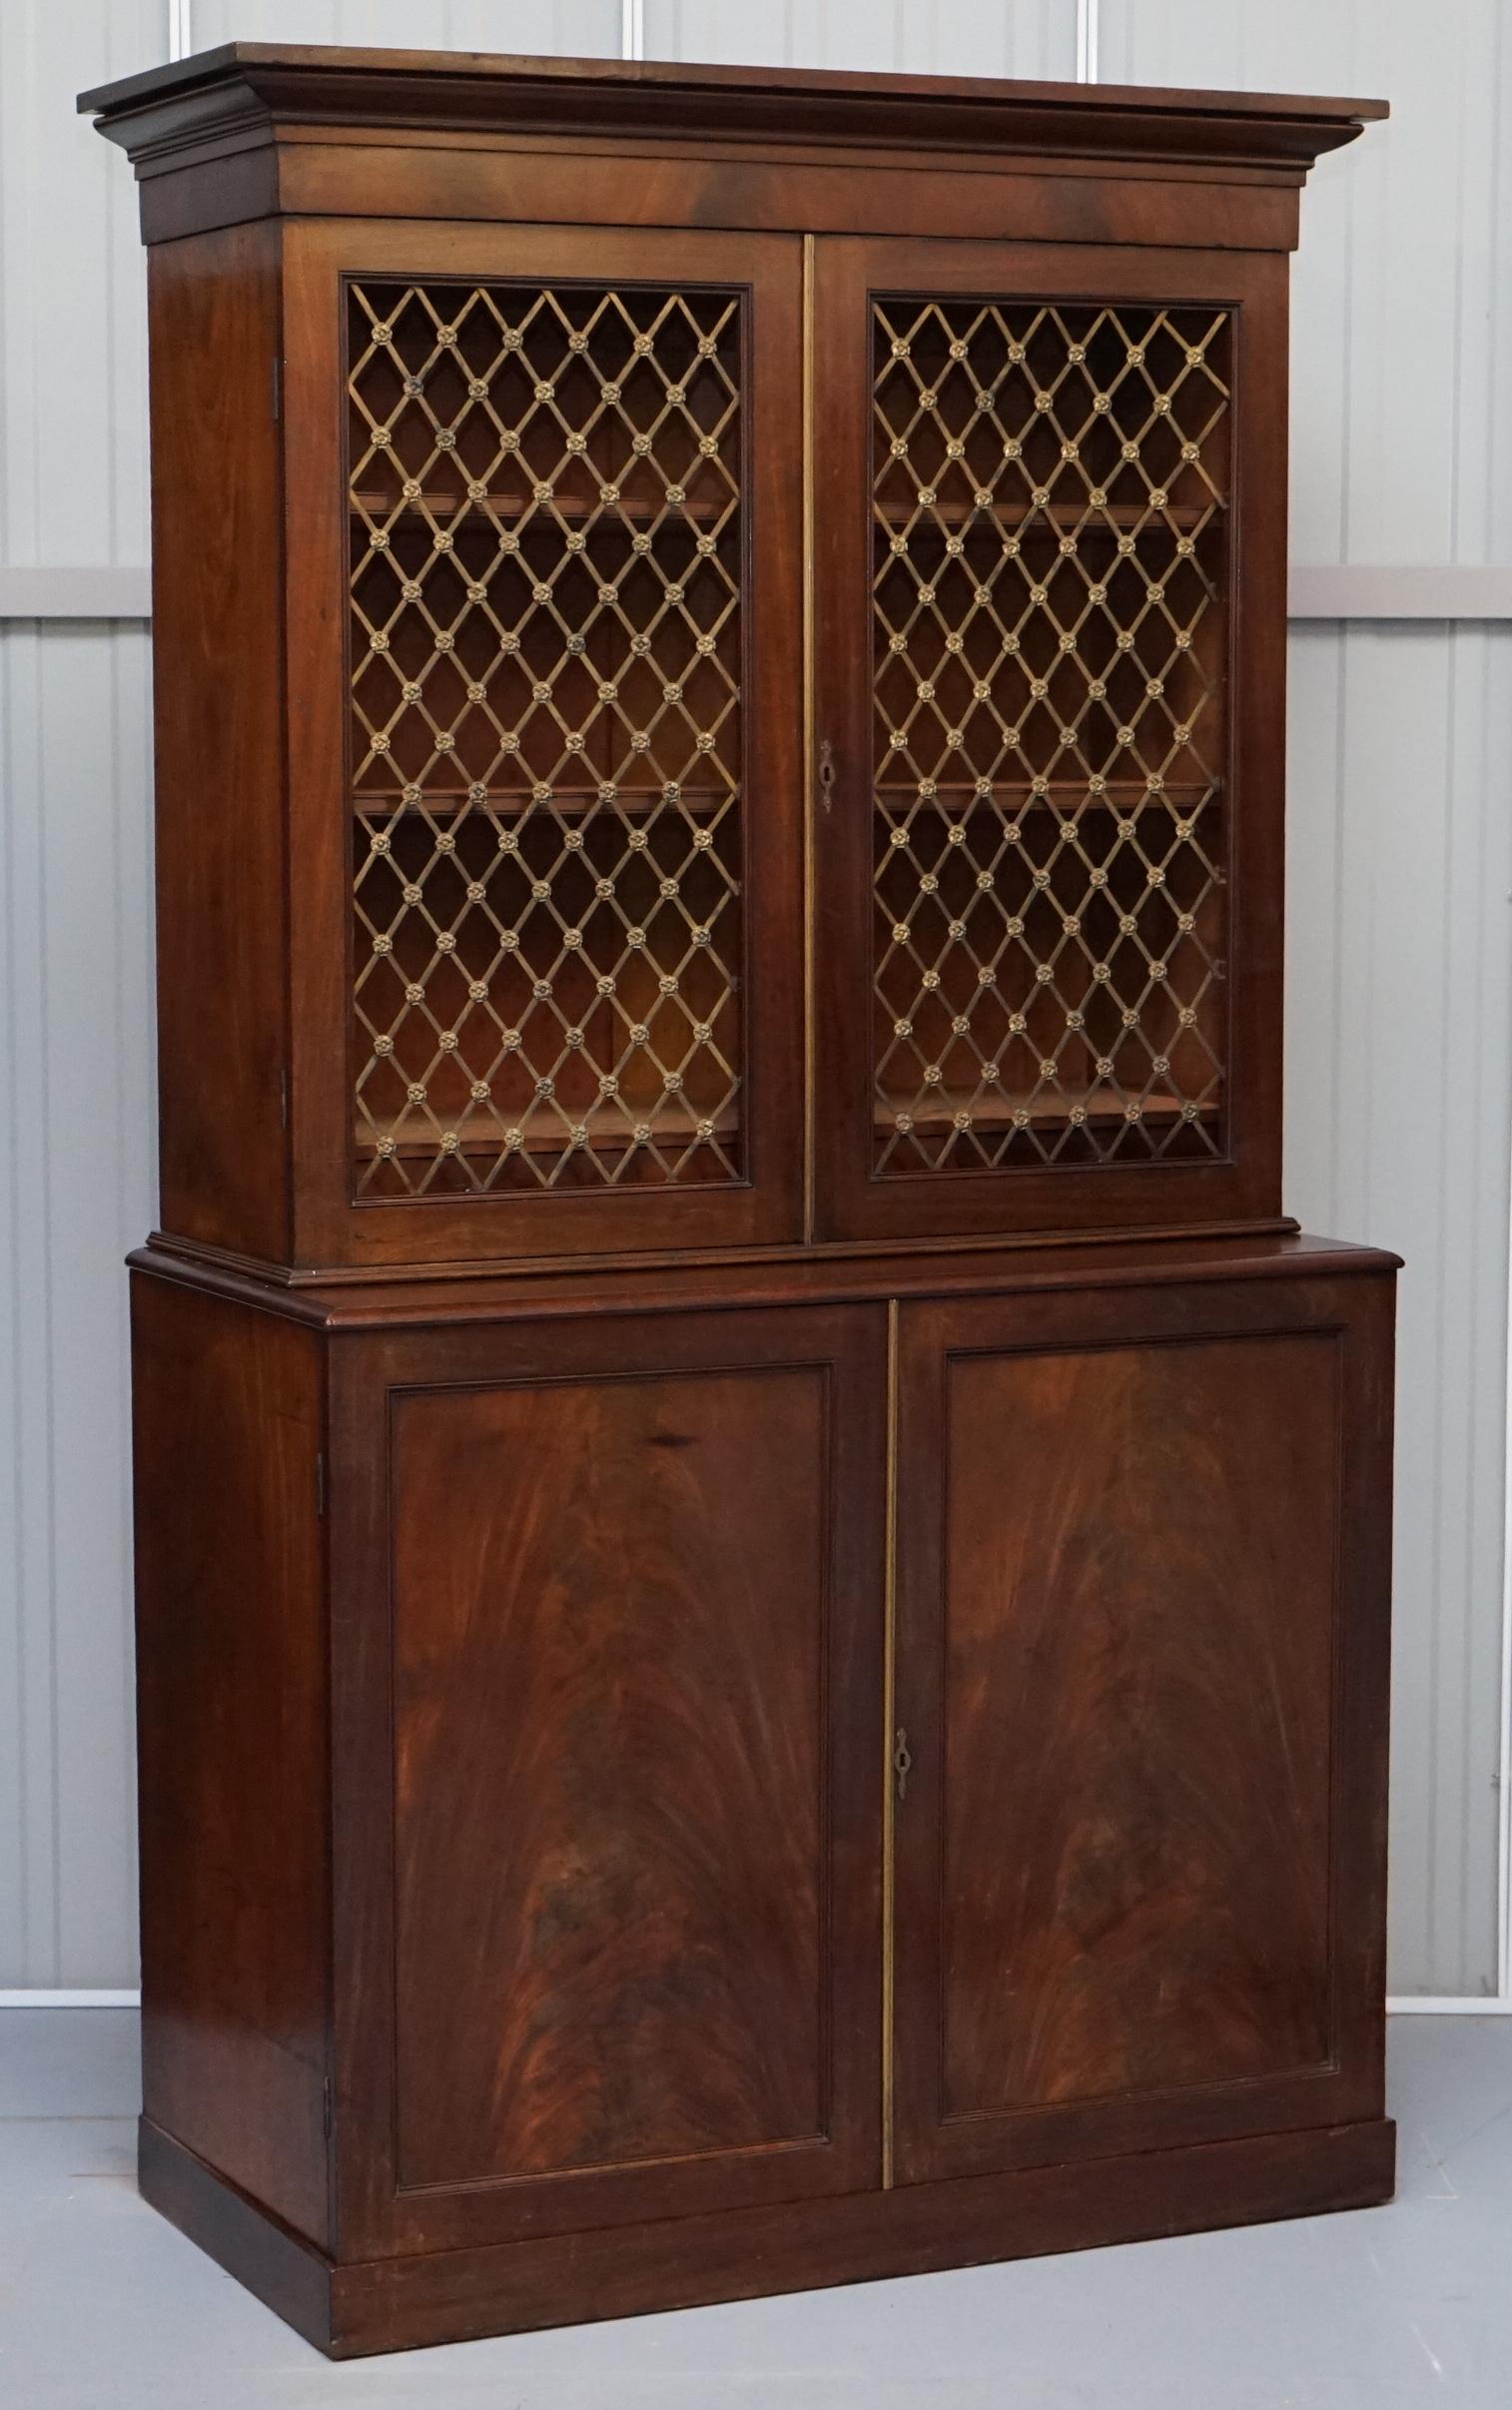 We are delighted to offer for sale this absolutely stunning Victorian mahogany with bronzed gold gilding pierced metal work doors and fittings bookcase sitting on a large chest of drawers inside the cupboard

A very good looking and large